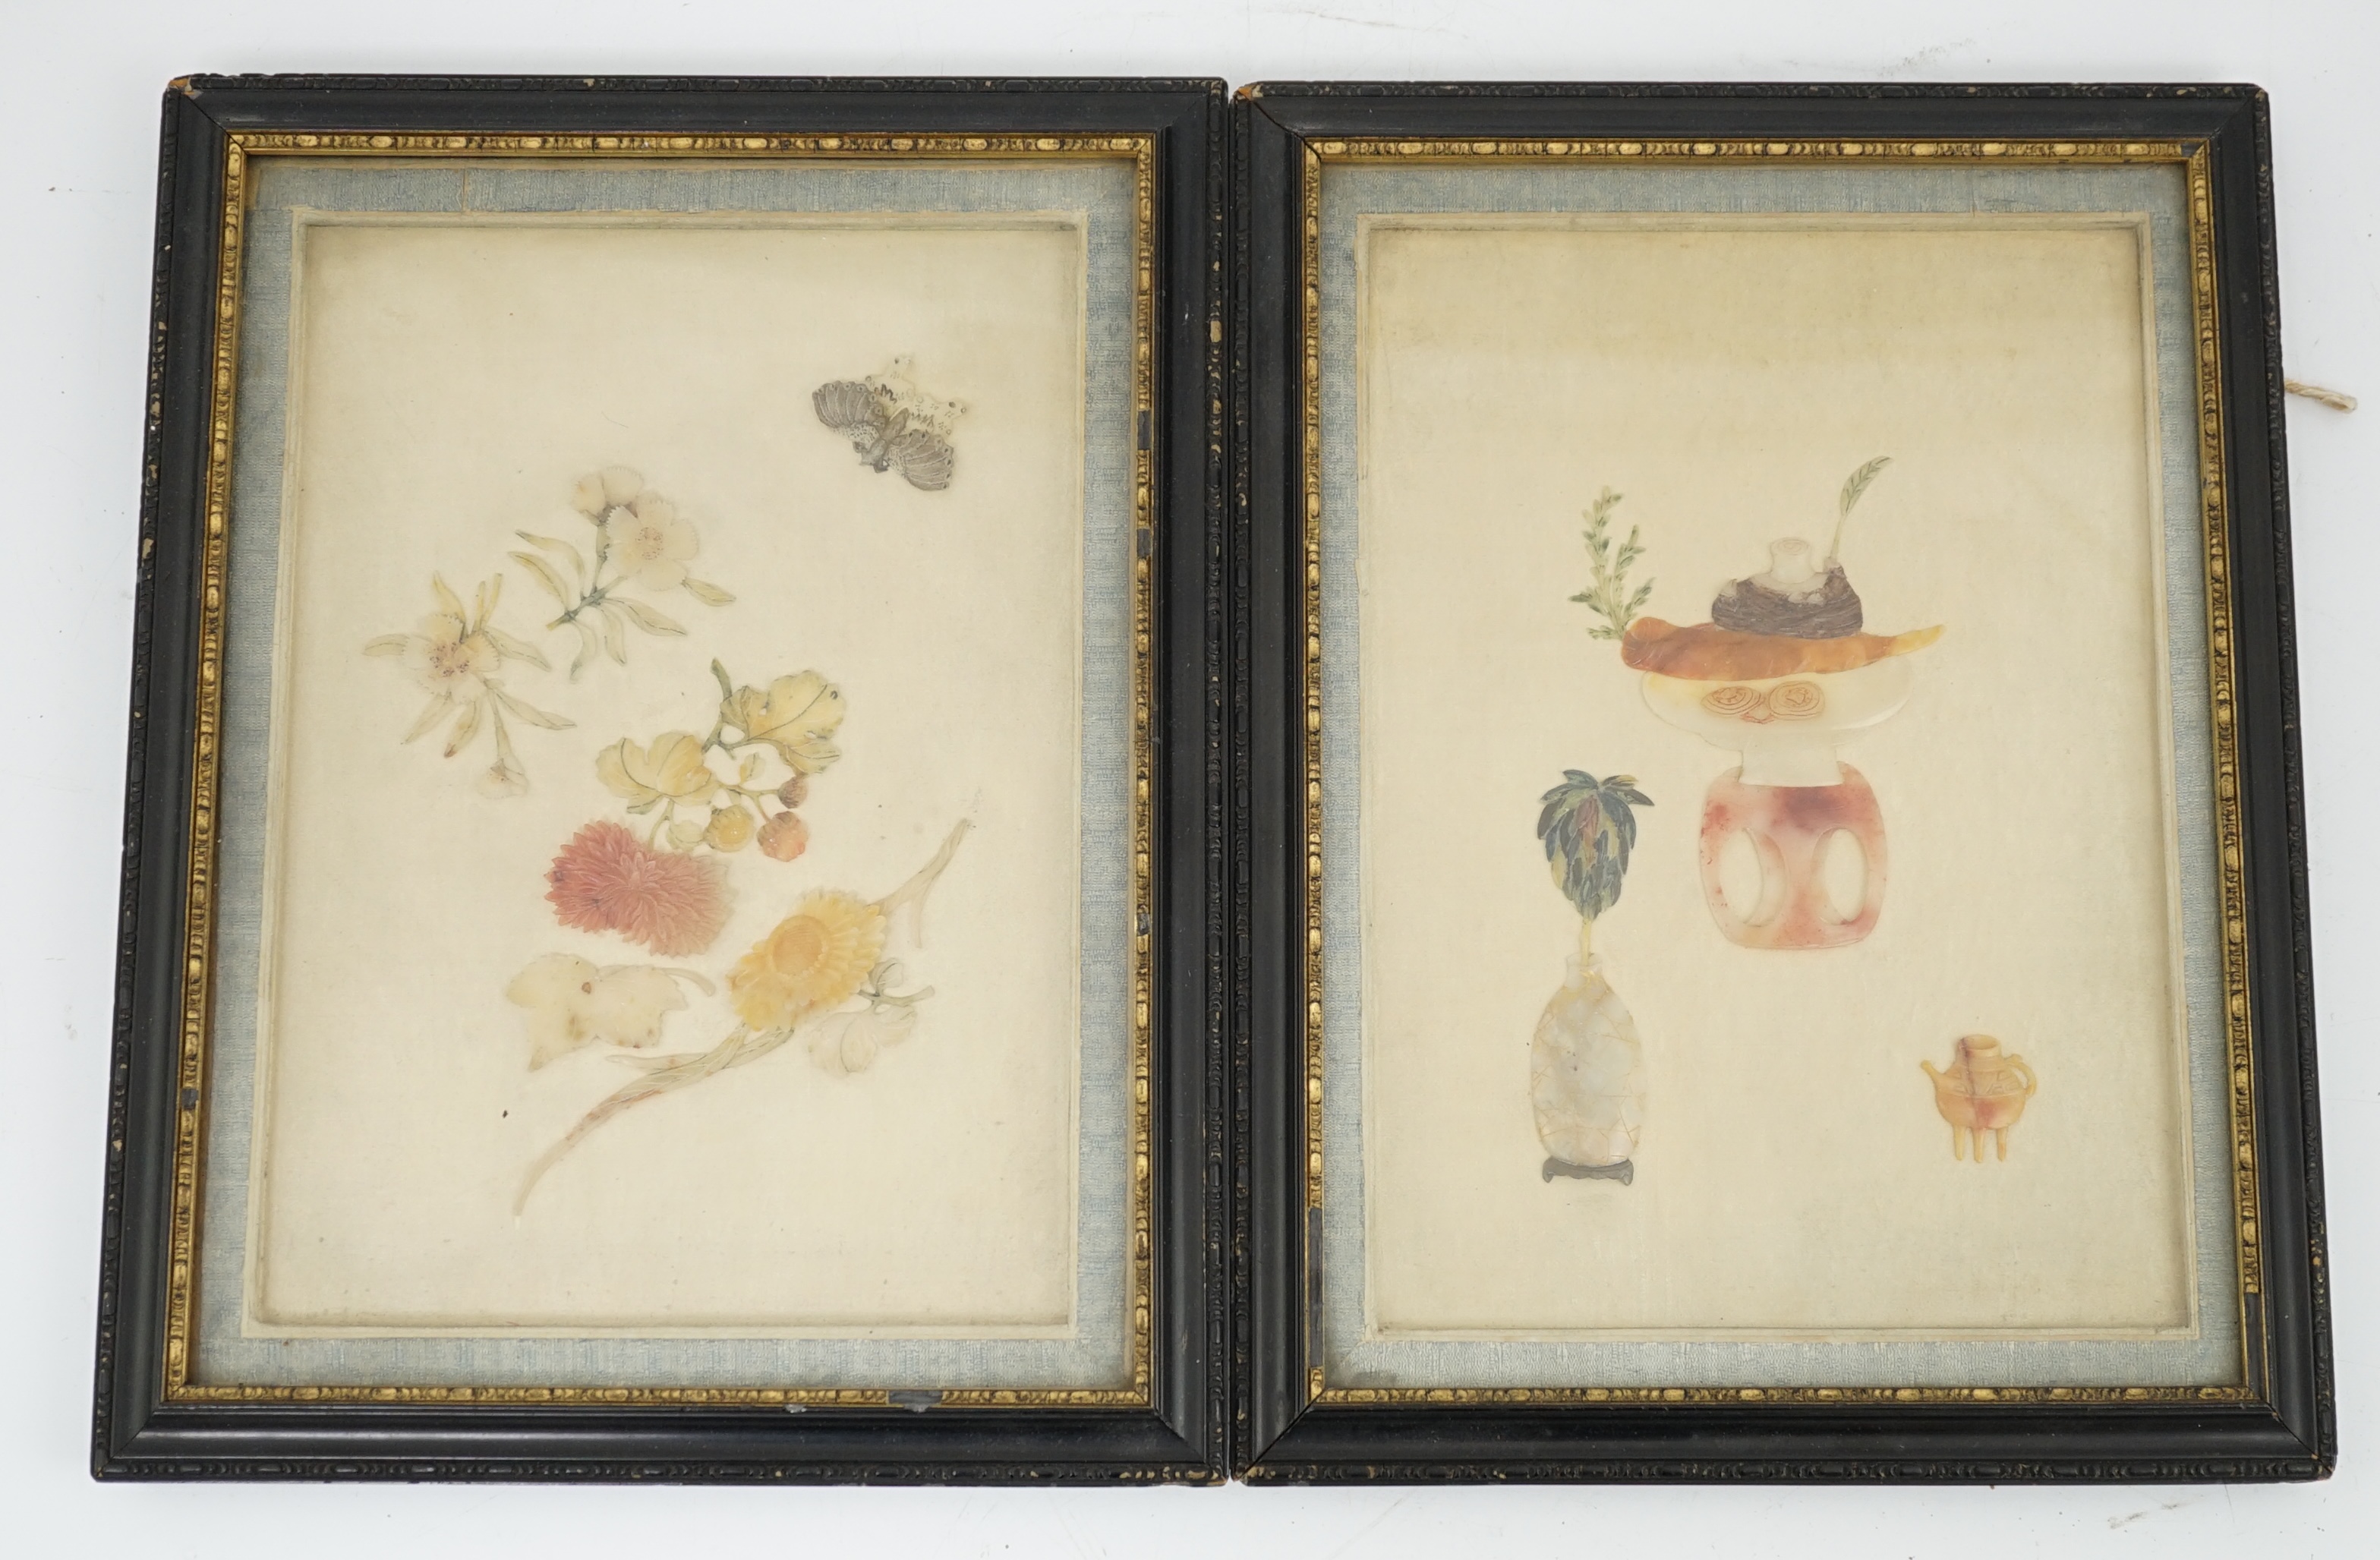 A pair of Chinese hardstone or soapstone appliqué work pictures of antiques, early 20th century